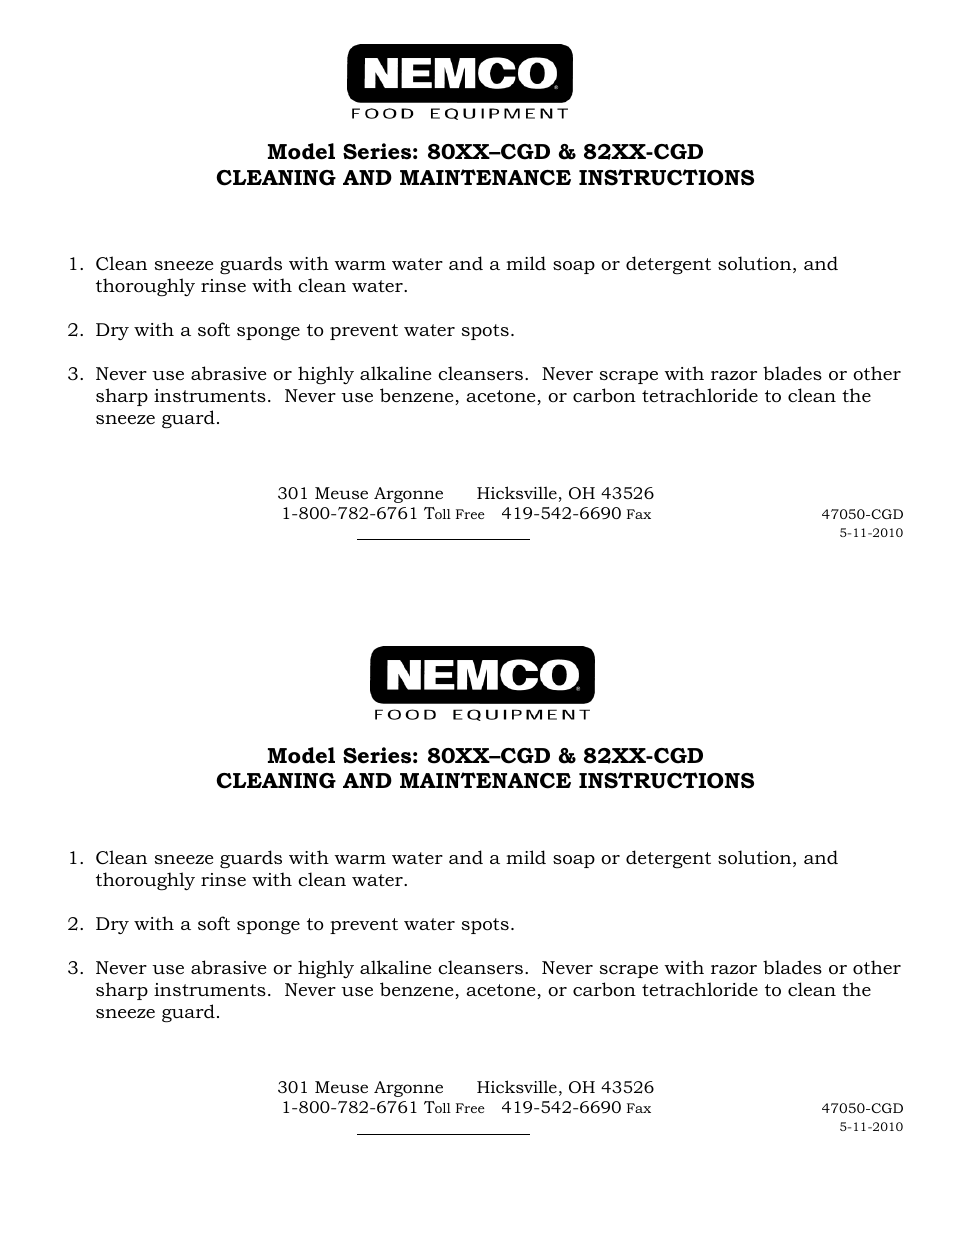 Nemco Food Equipment Roller Grill Guards (Canopy Guard)- Cleaning Instructions User Manual | 1 page